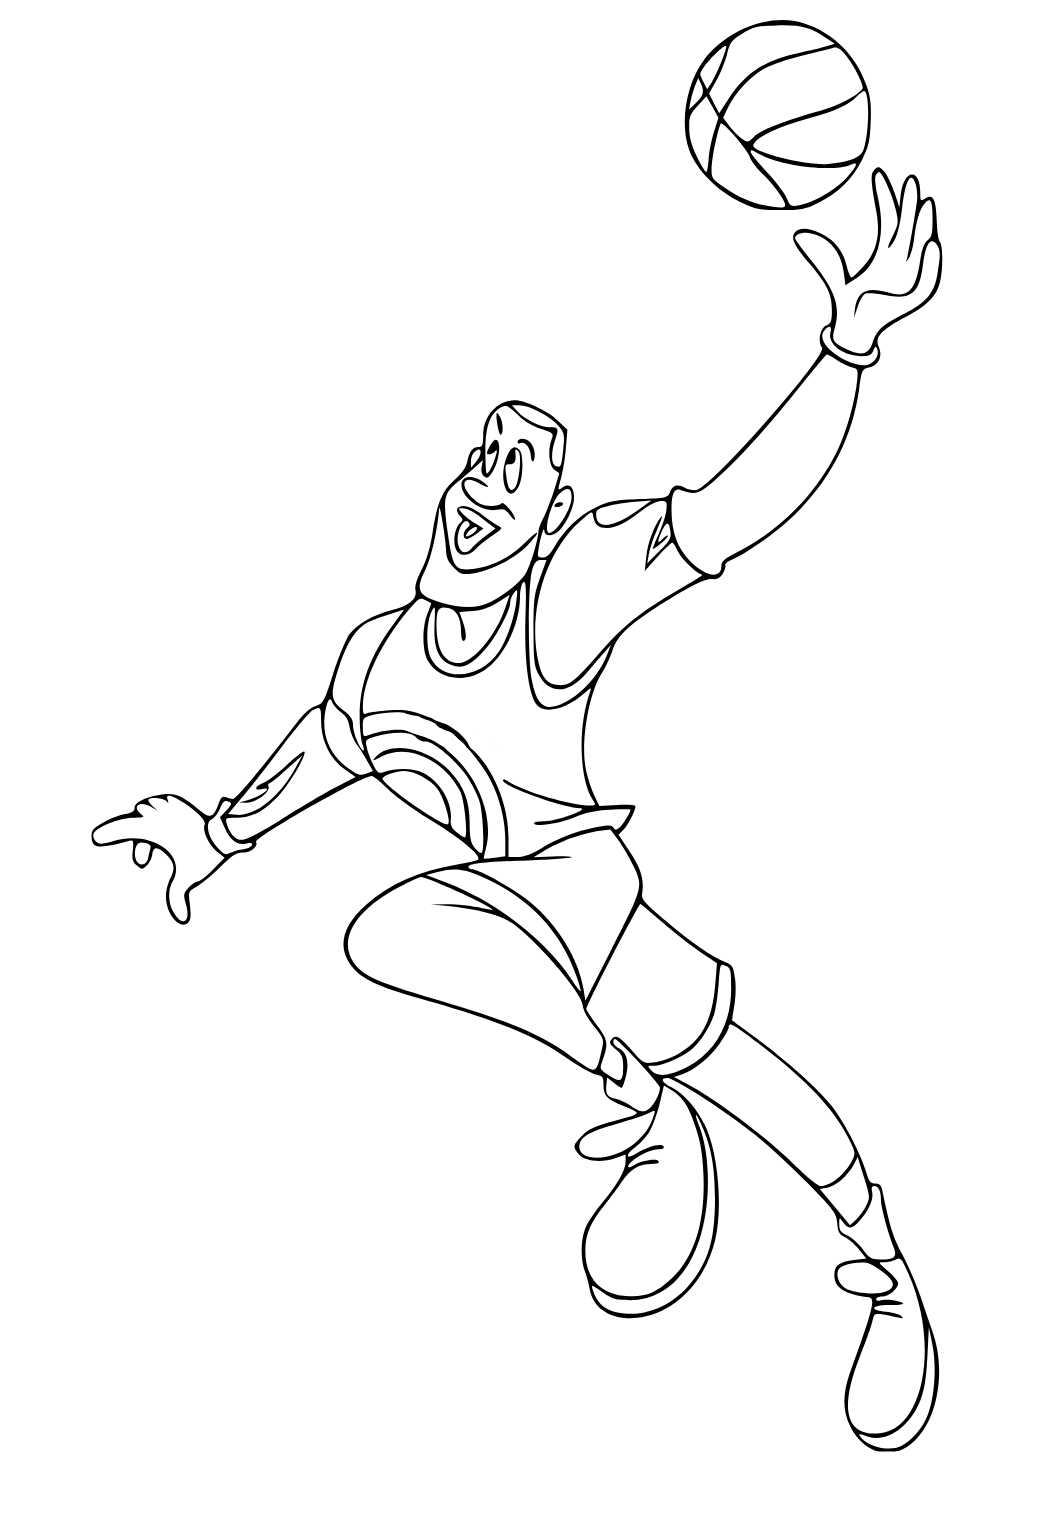 Free printable lebron james jump coloring page for adults and kids